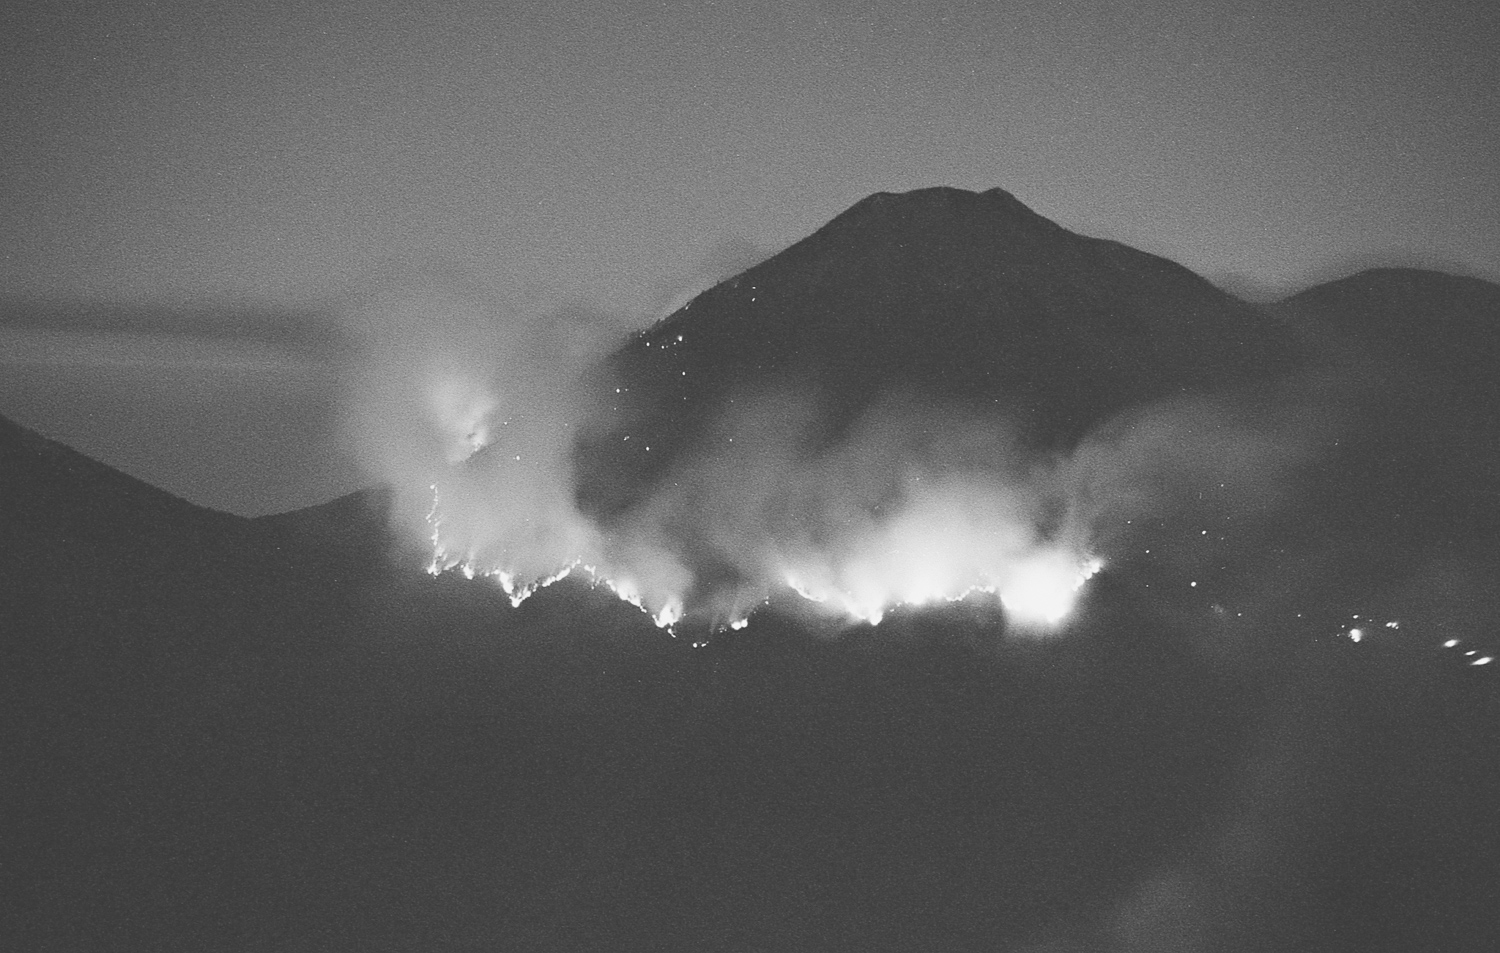 The Fire on the Next Mountain Over